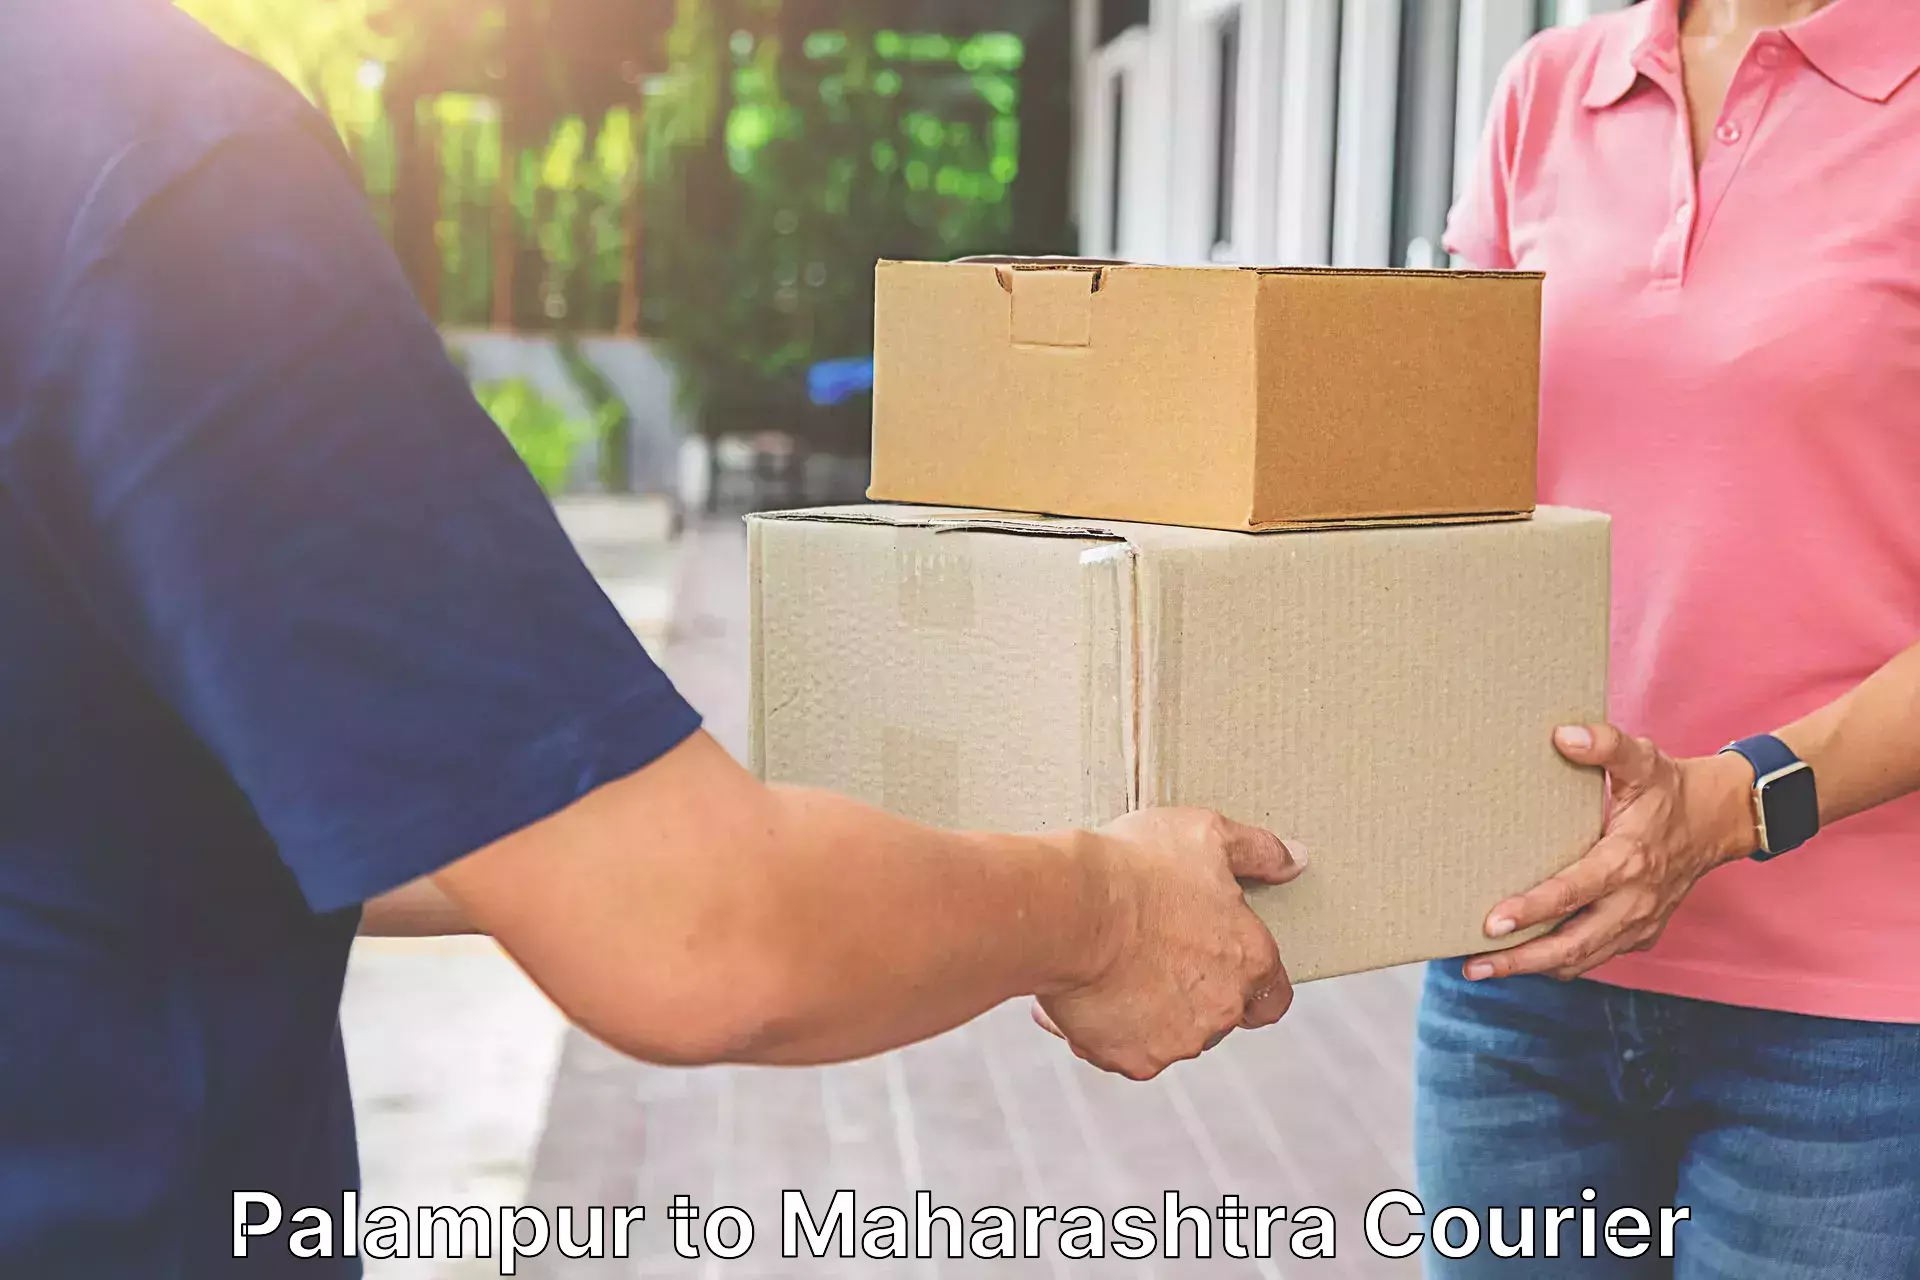 Delivery service partnership Palampur to Yeola